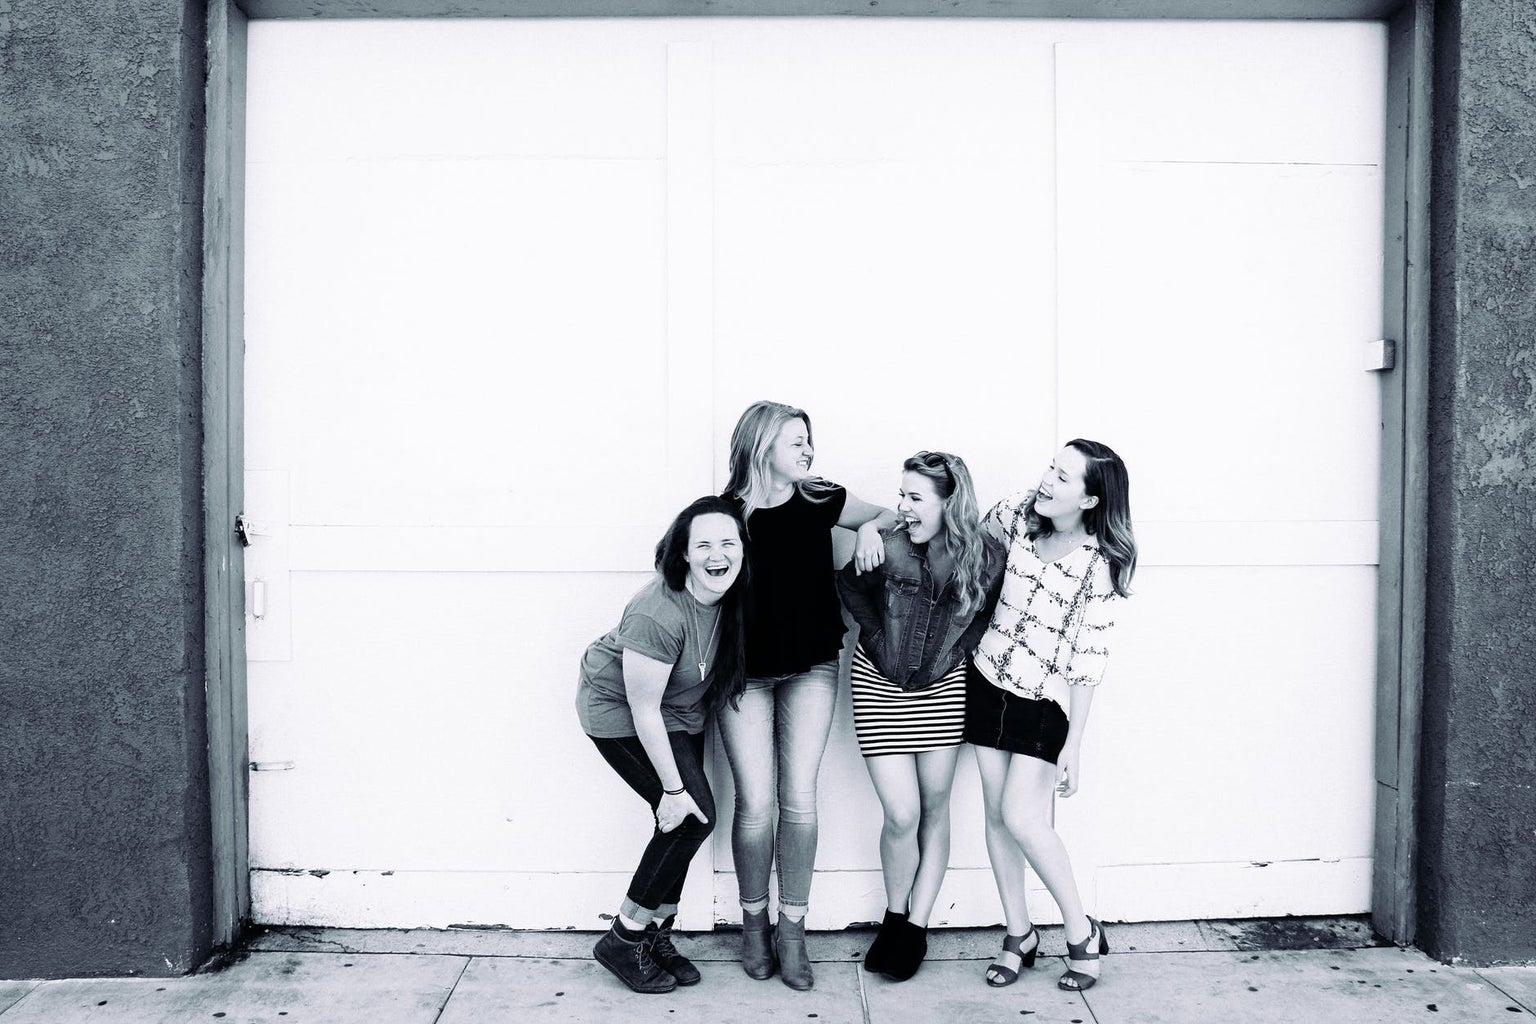 Black and white image of 4 women laughing and holding onto each other